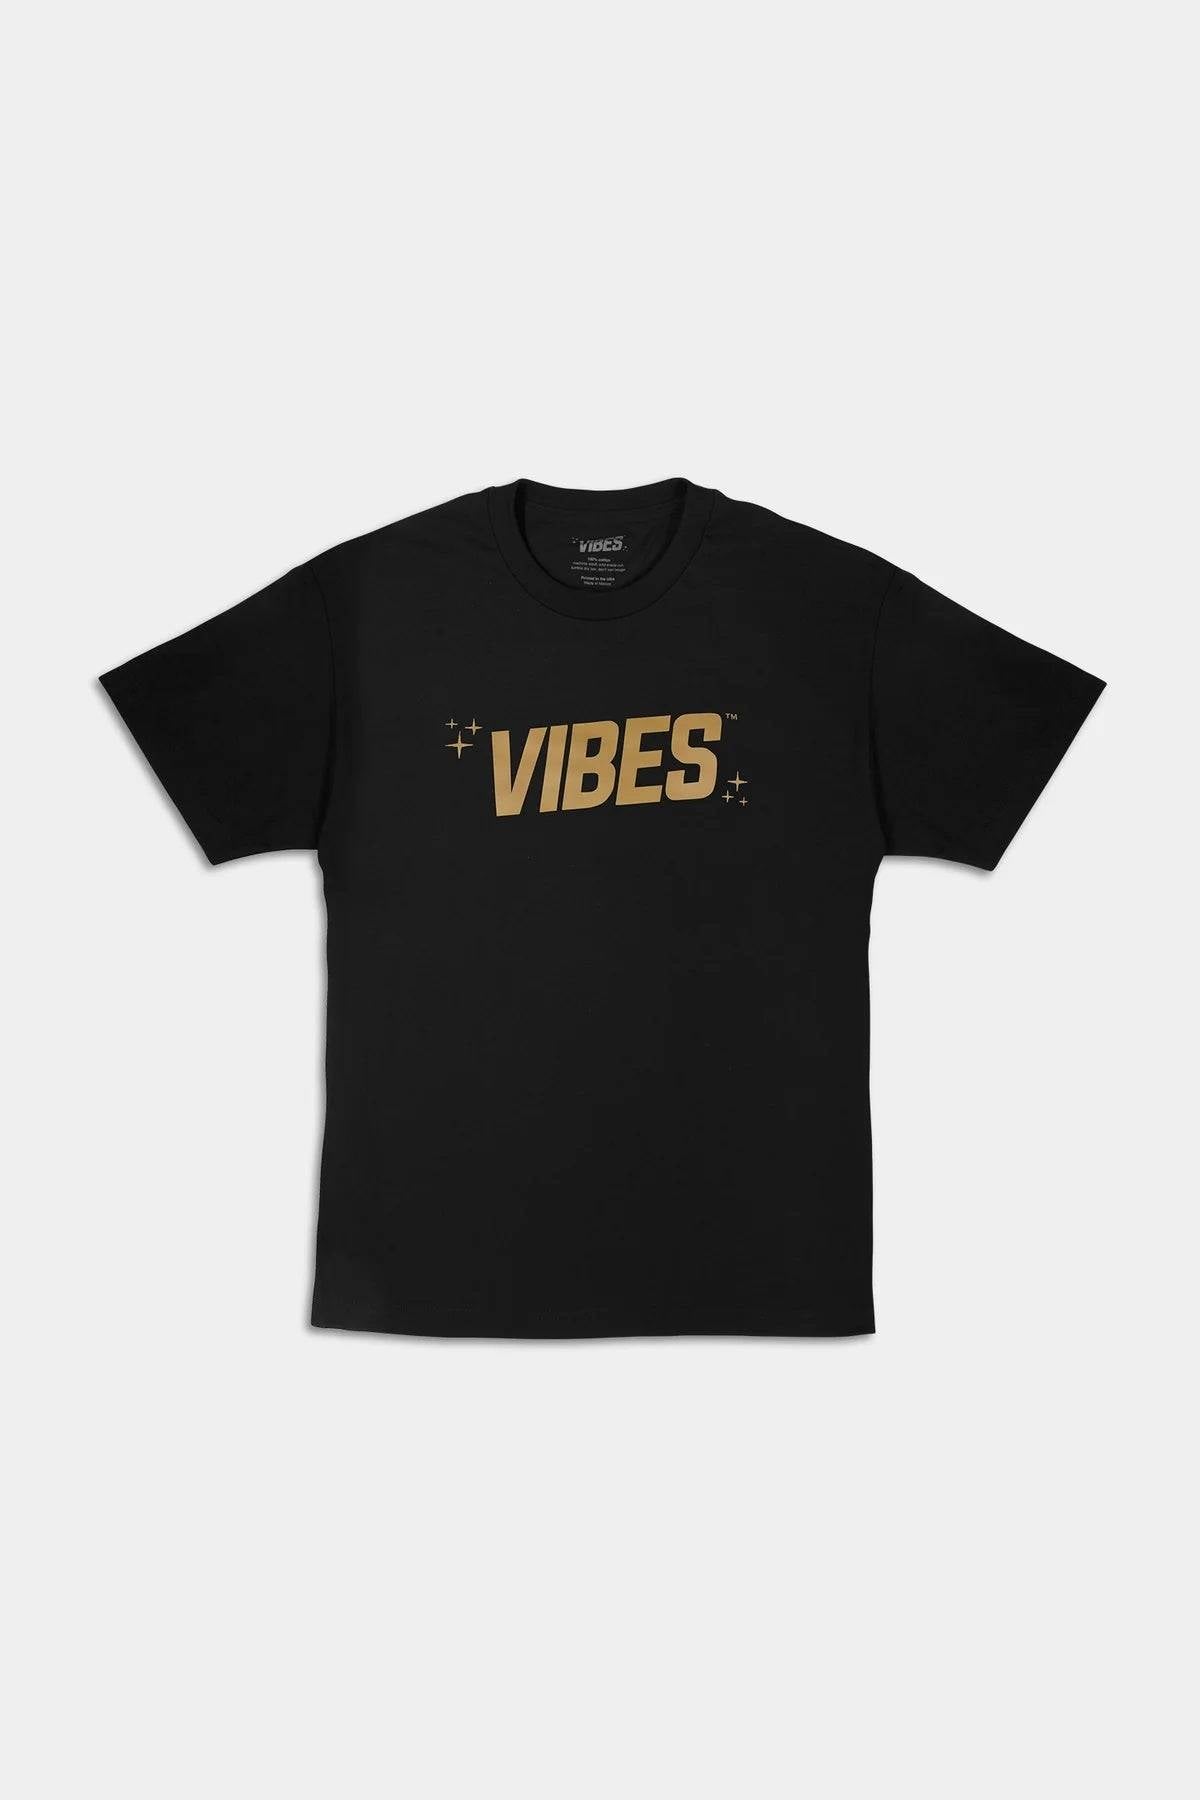 VIBES Black With Gold Logo T-Shirt 2X-Large